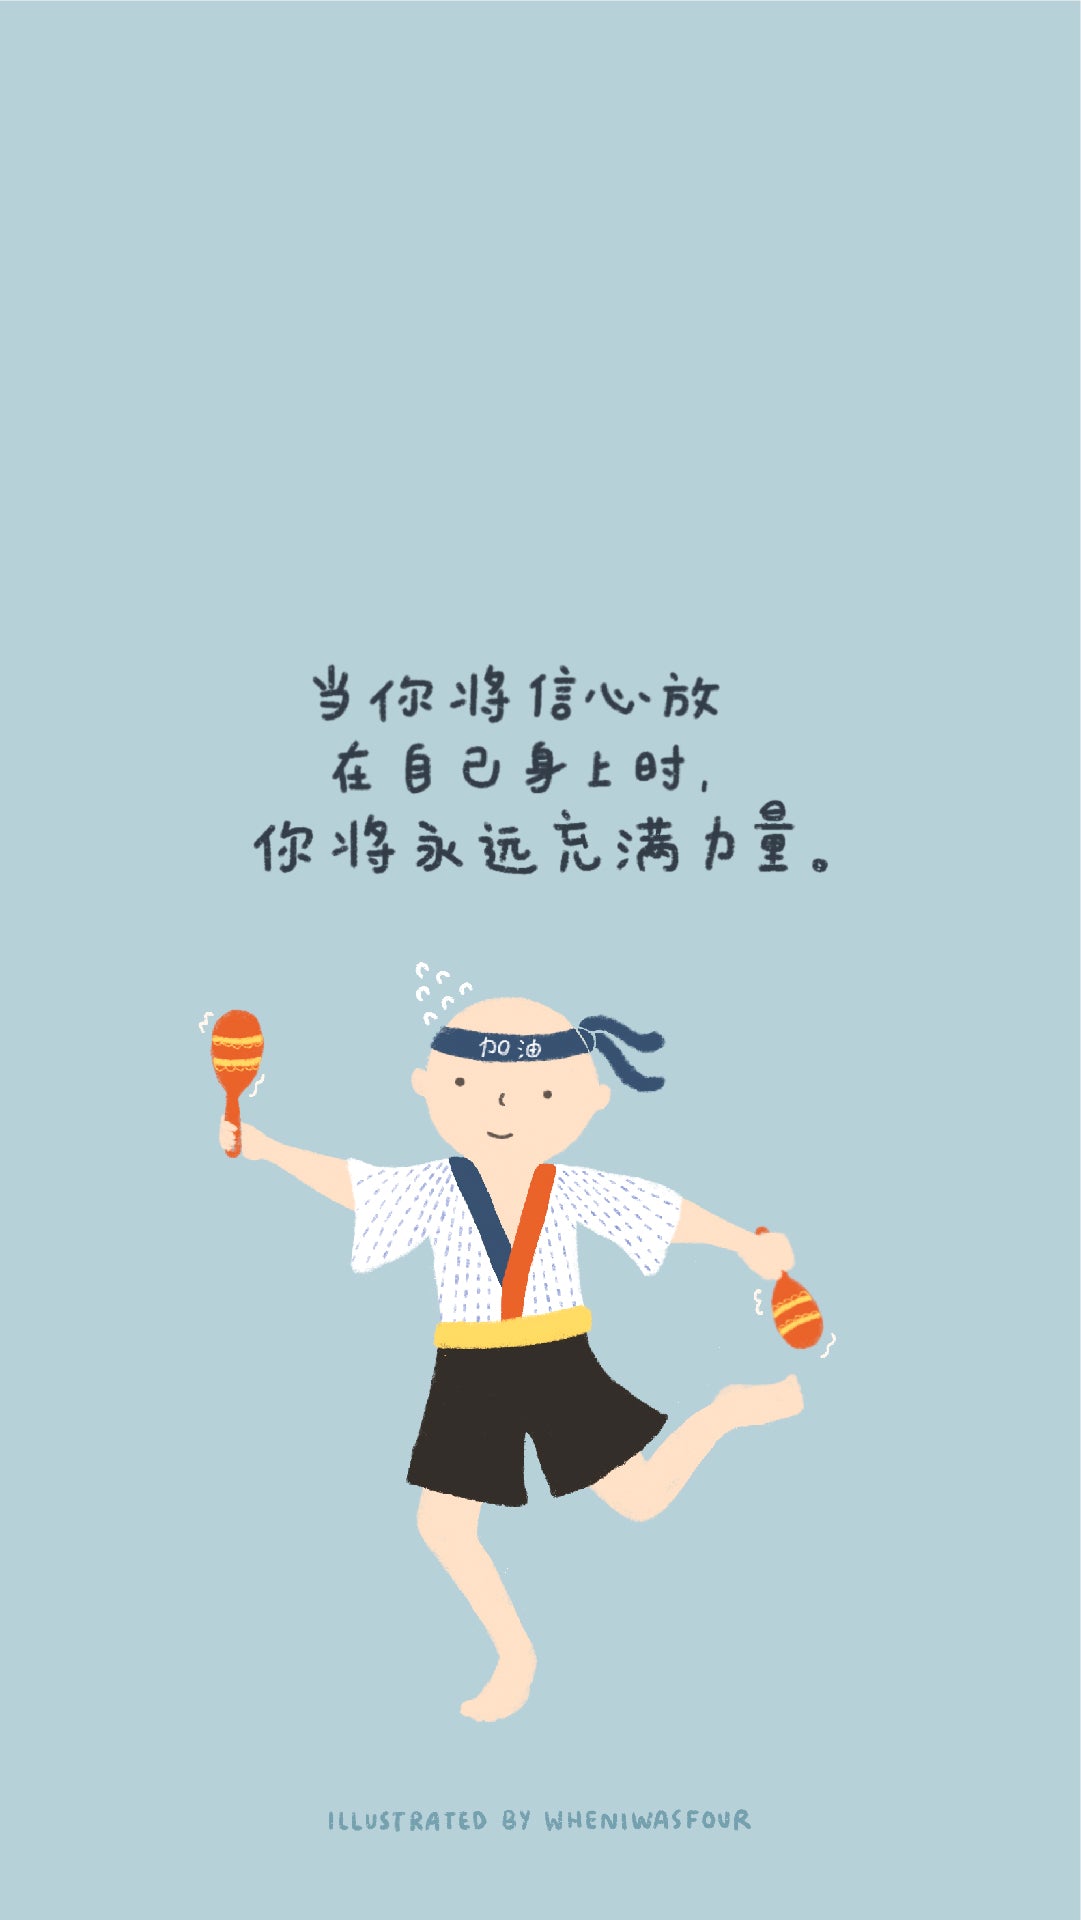 phone wallpaper of a digital illustration of a man in a traditional japanese costume holding two shakers cheering along with a chinese quote about believing in yourself